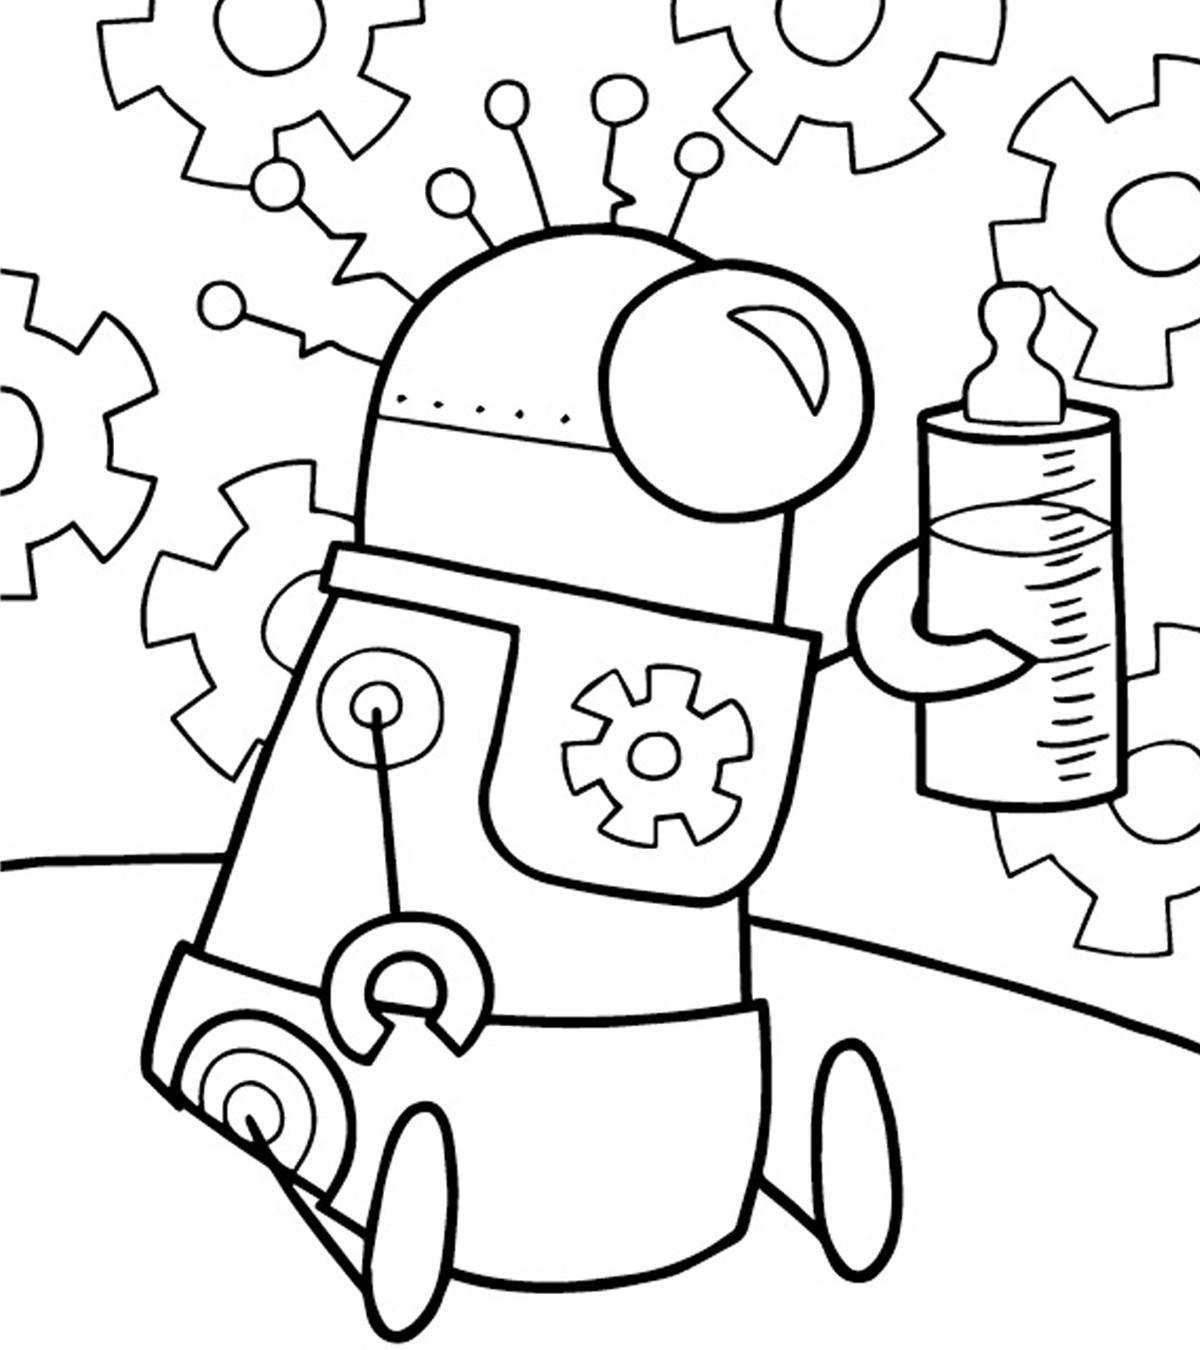 Fun robot coloring book for kids 6-7 years old